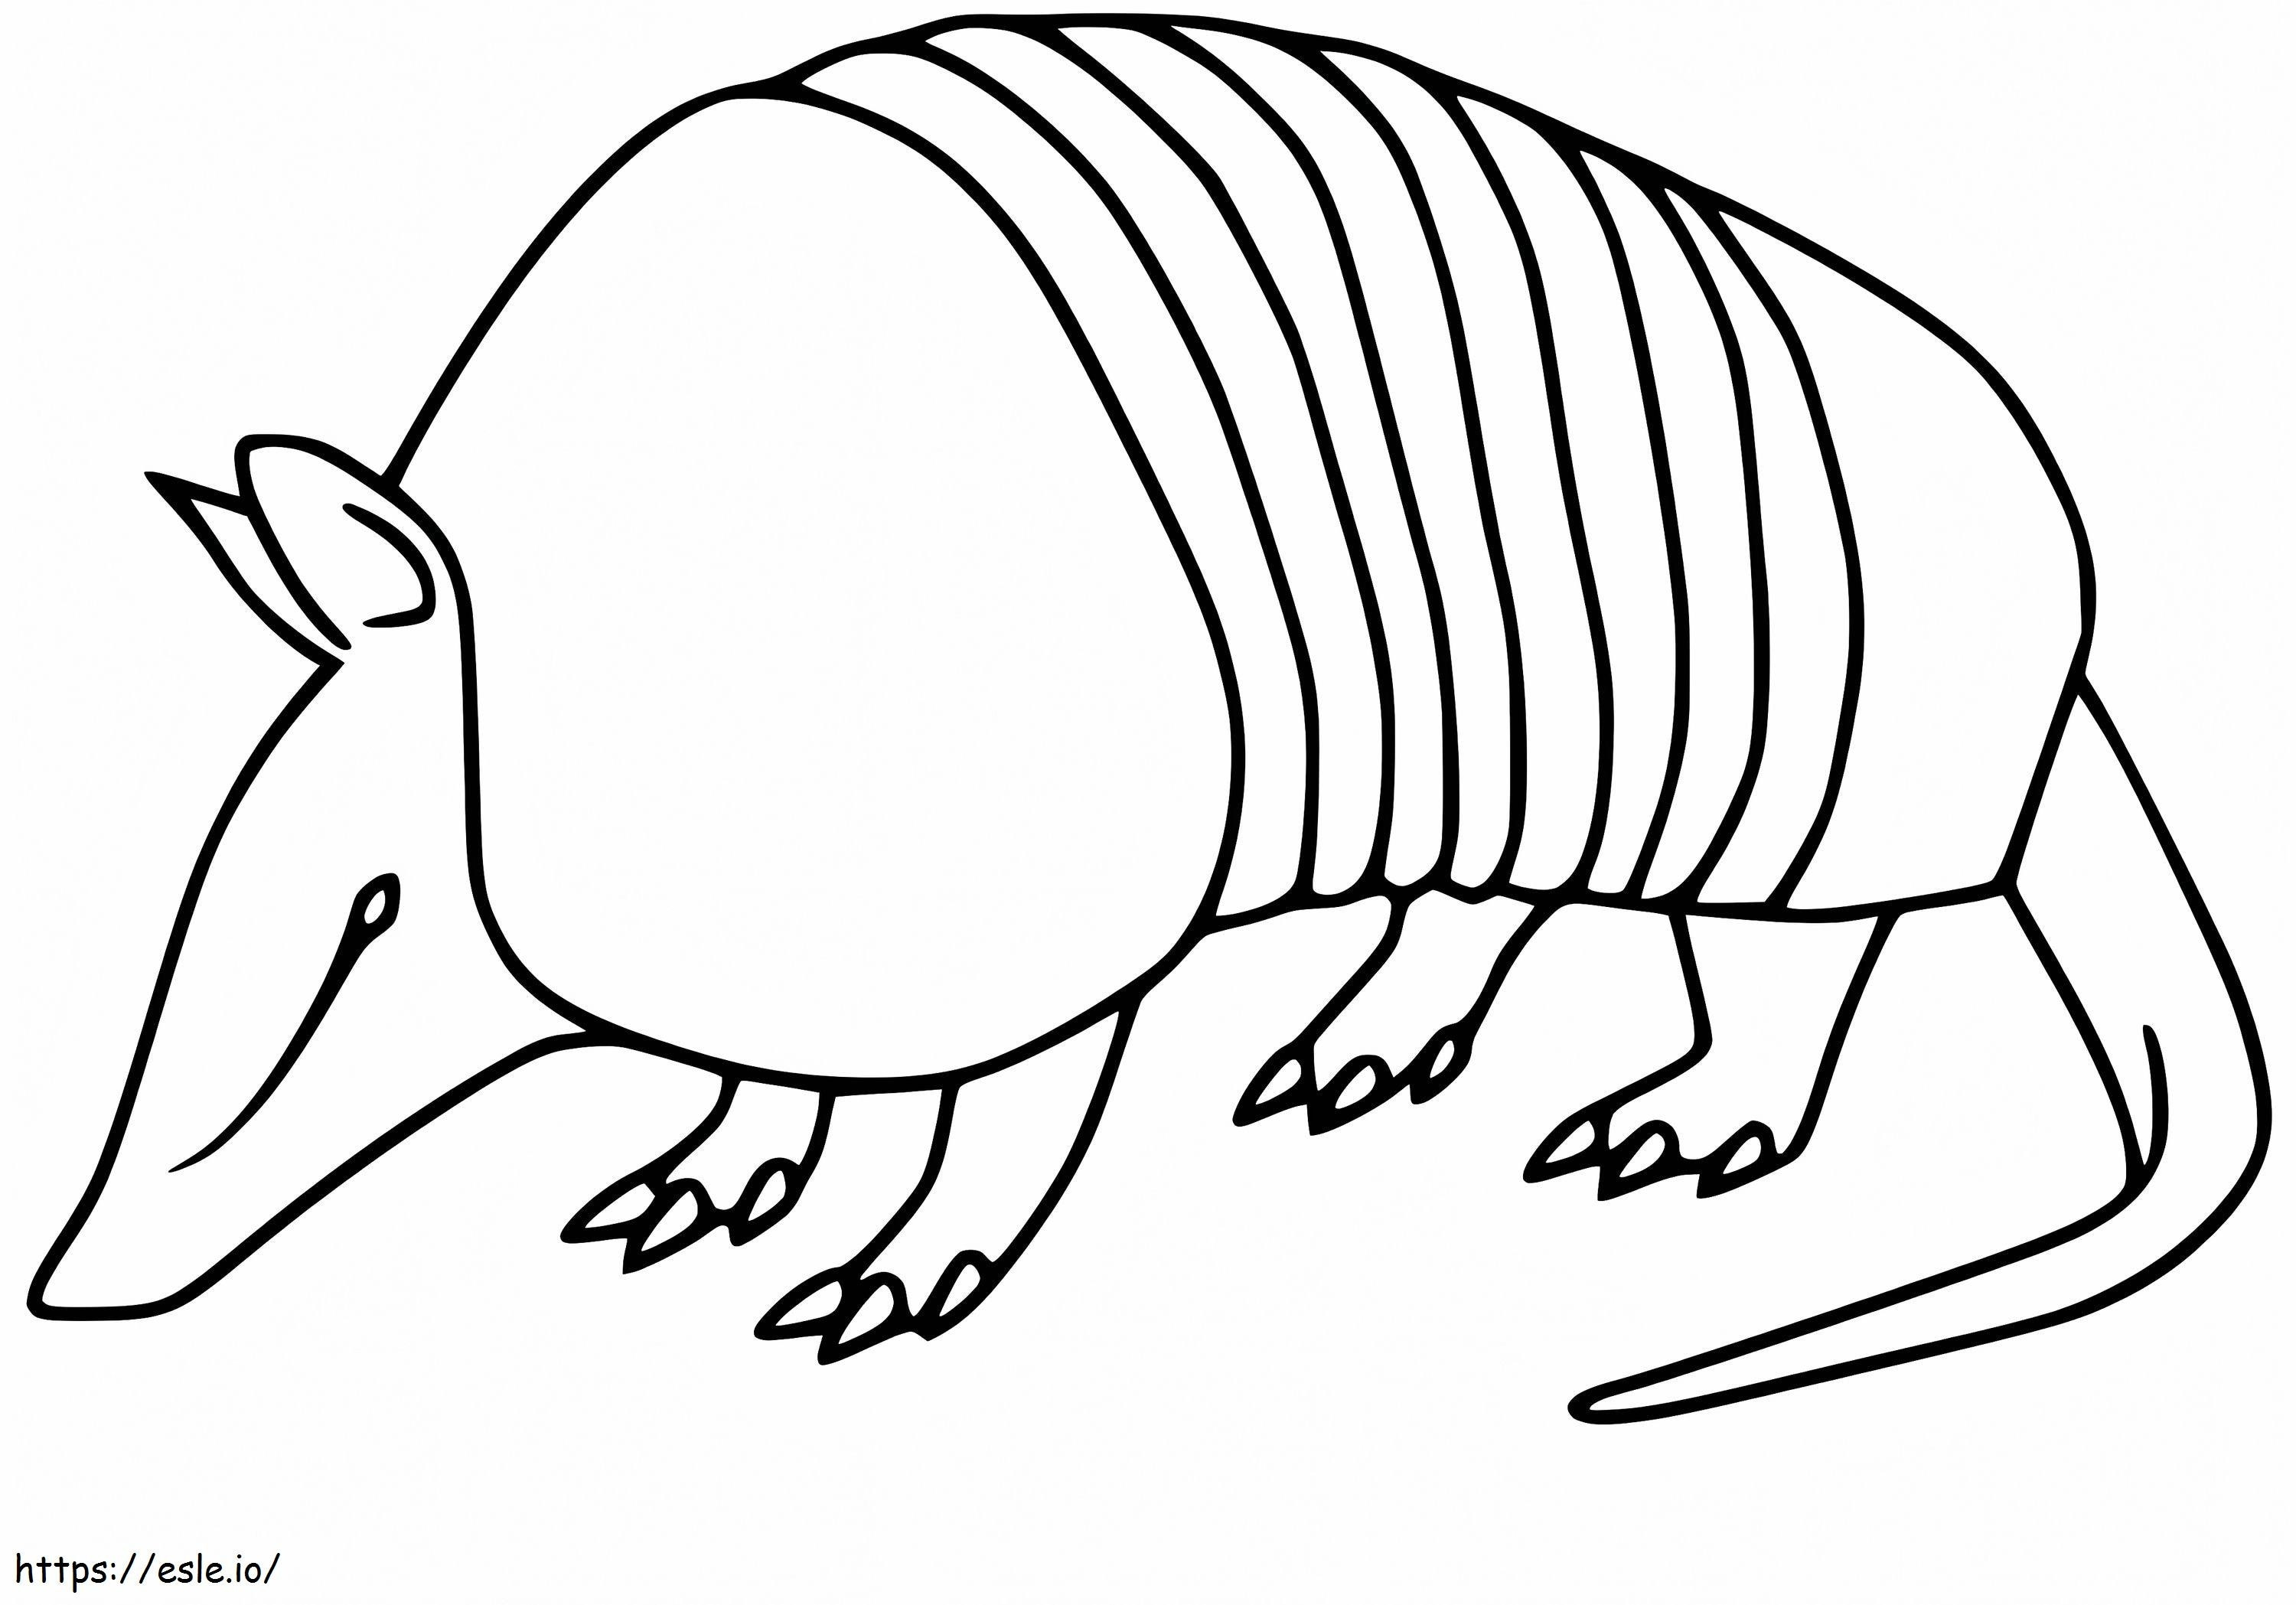 Easy Armadilo coloring page